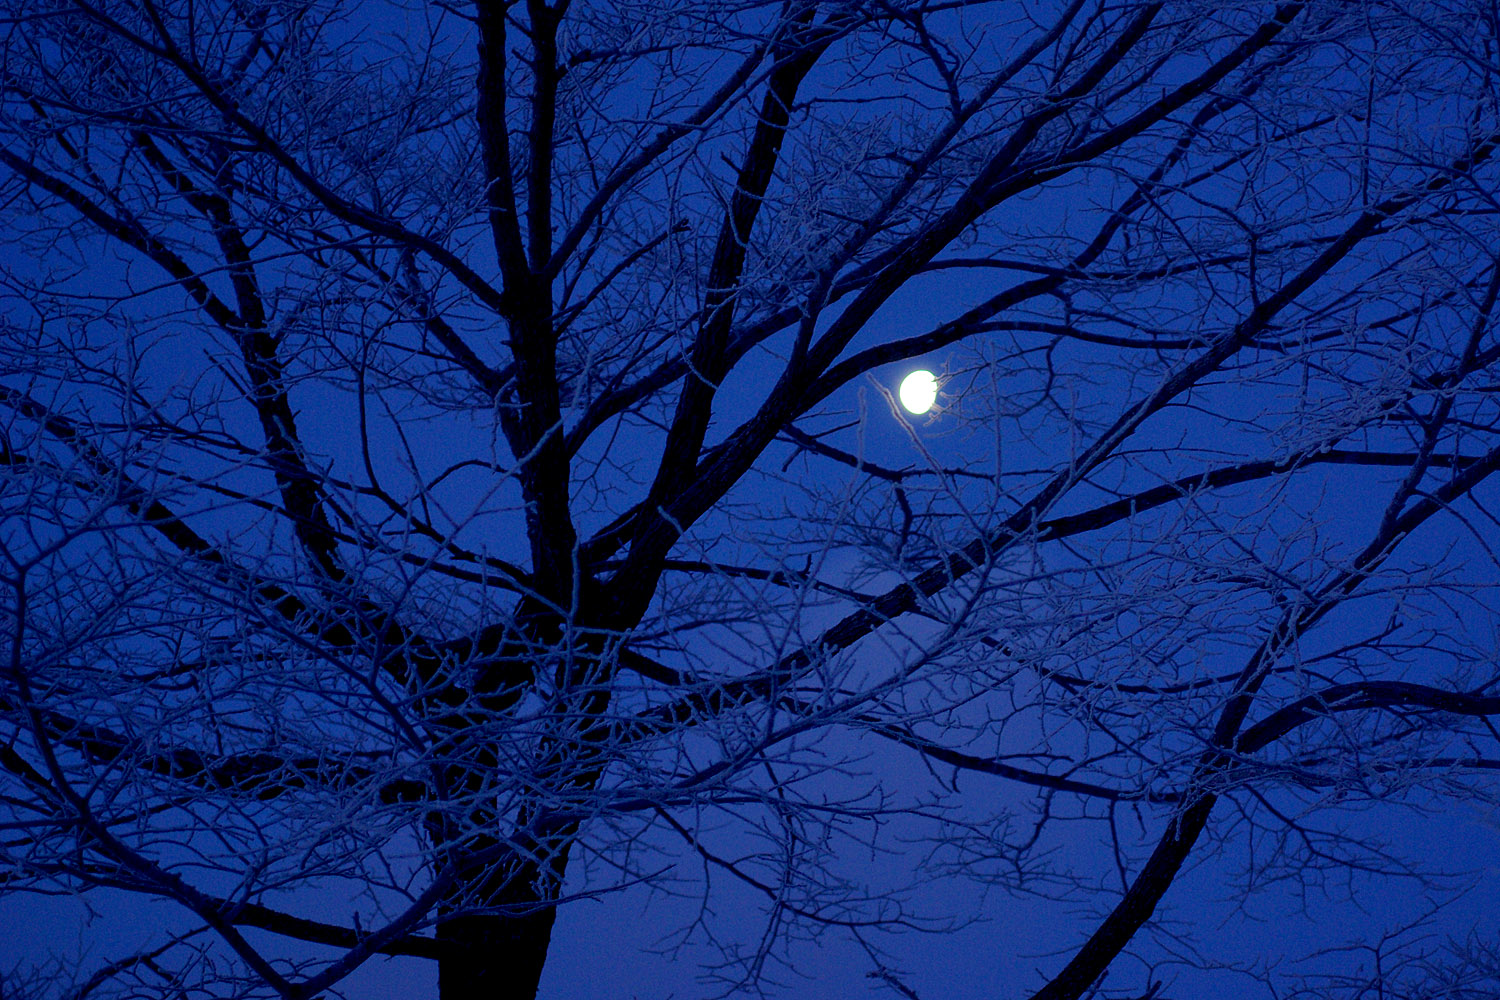 a tree in the night with some very thin leaves